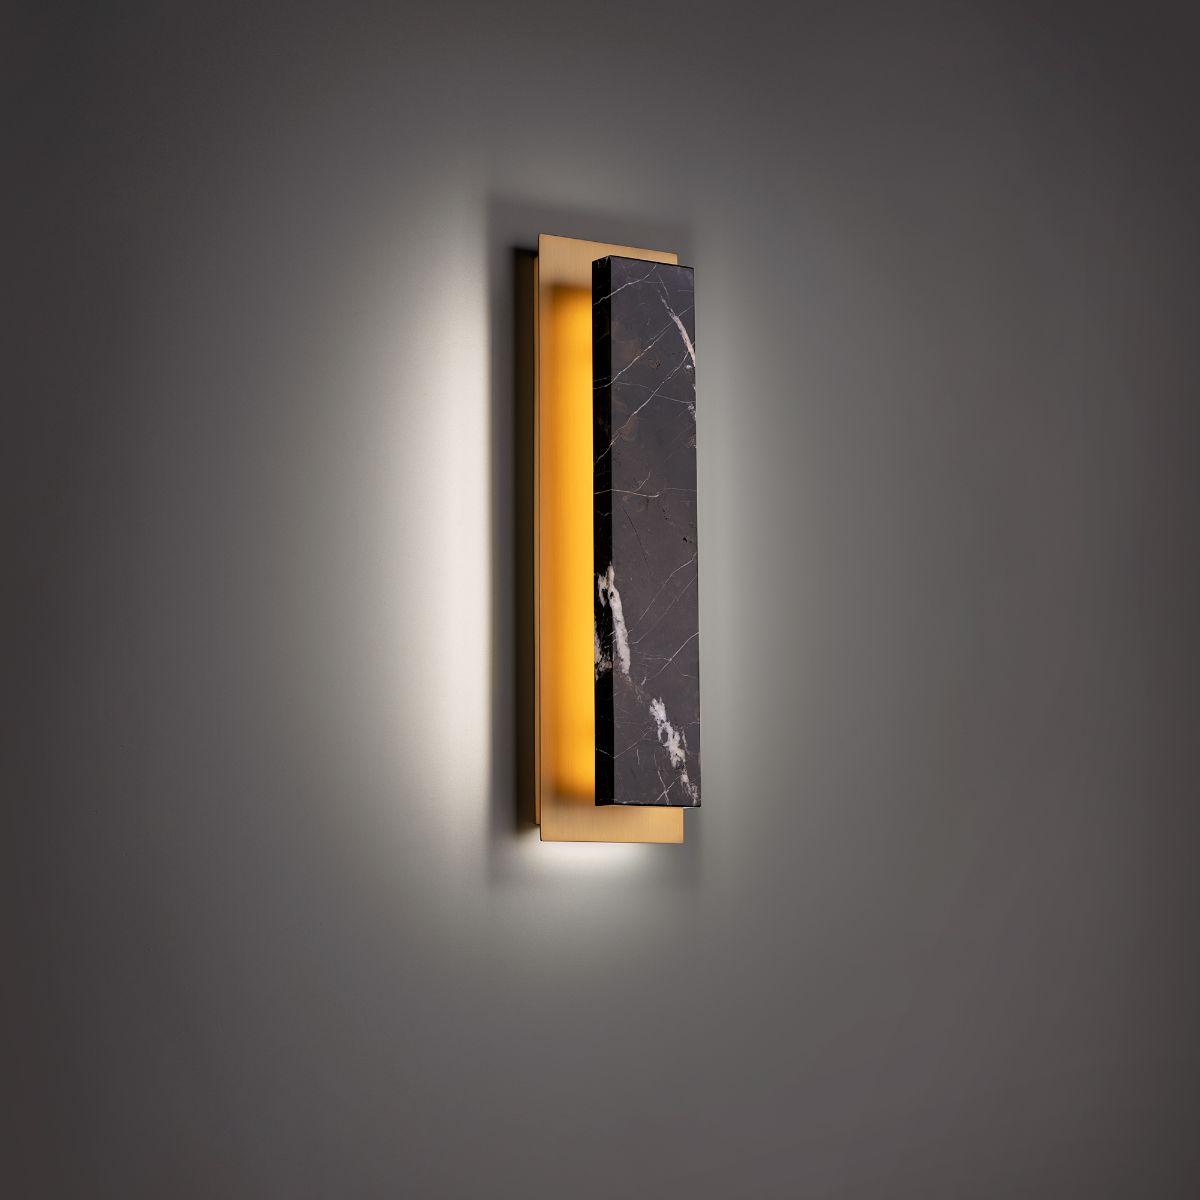 Zurich 18 in. LED Wall Sconce Black & Brass finish